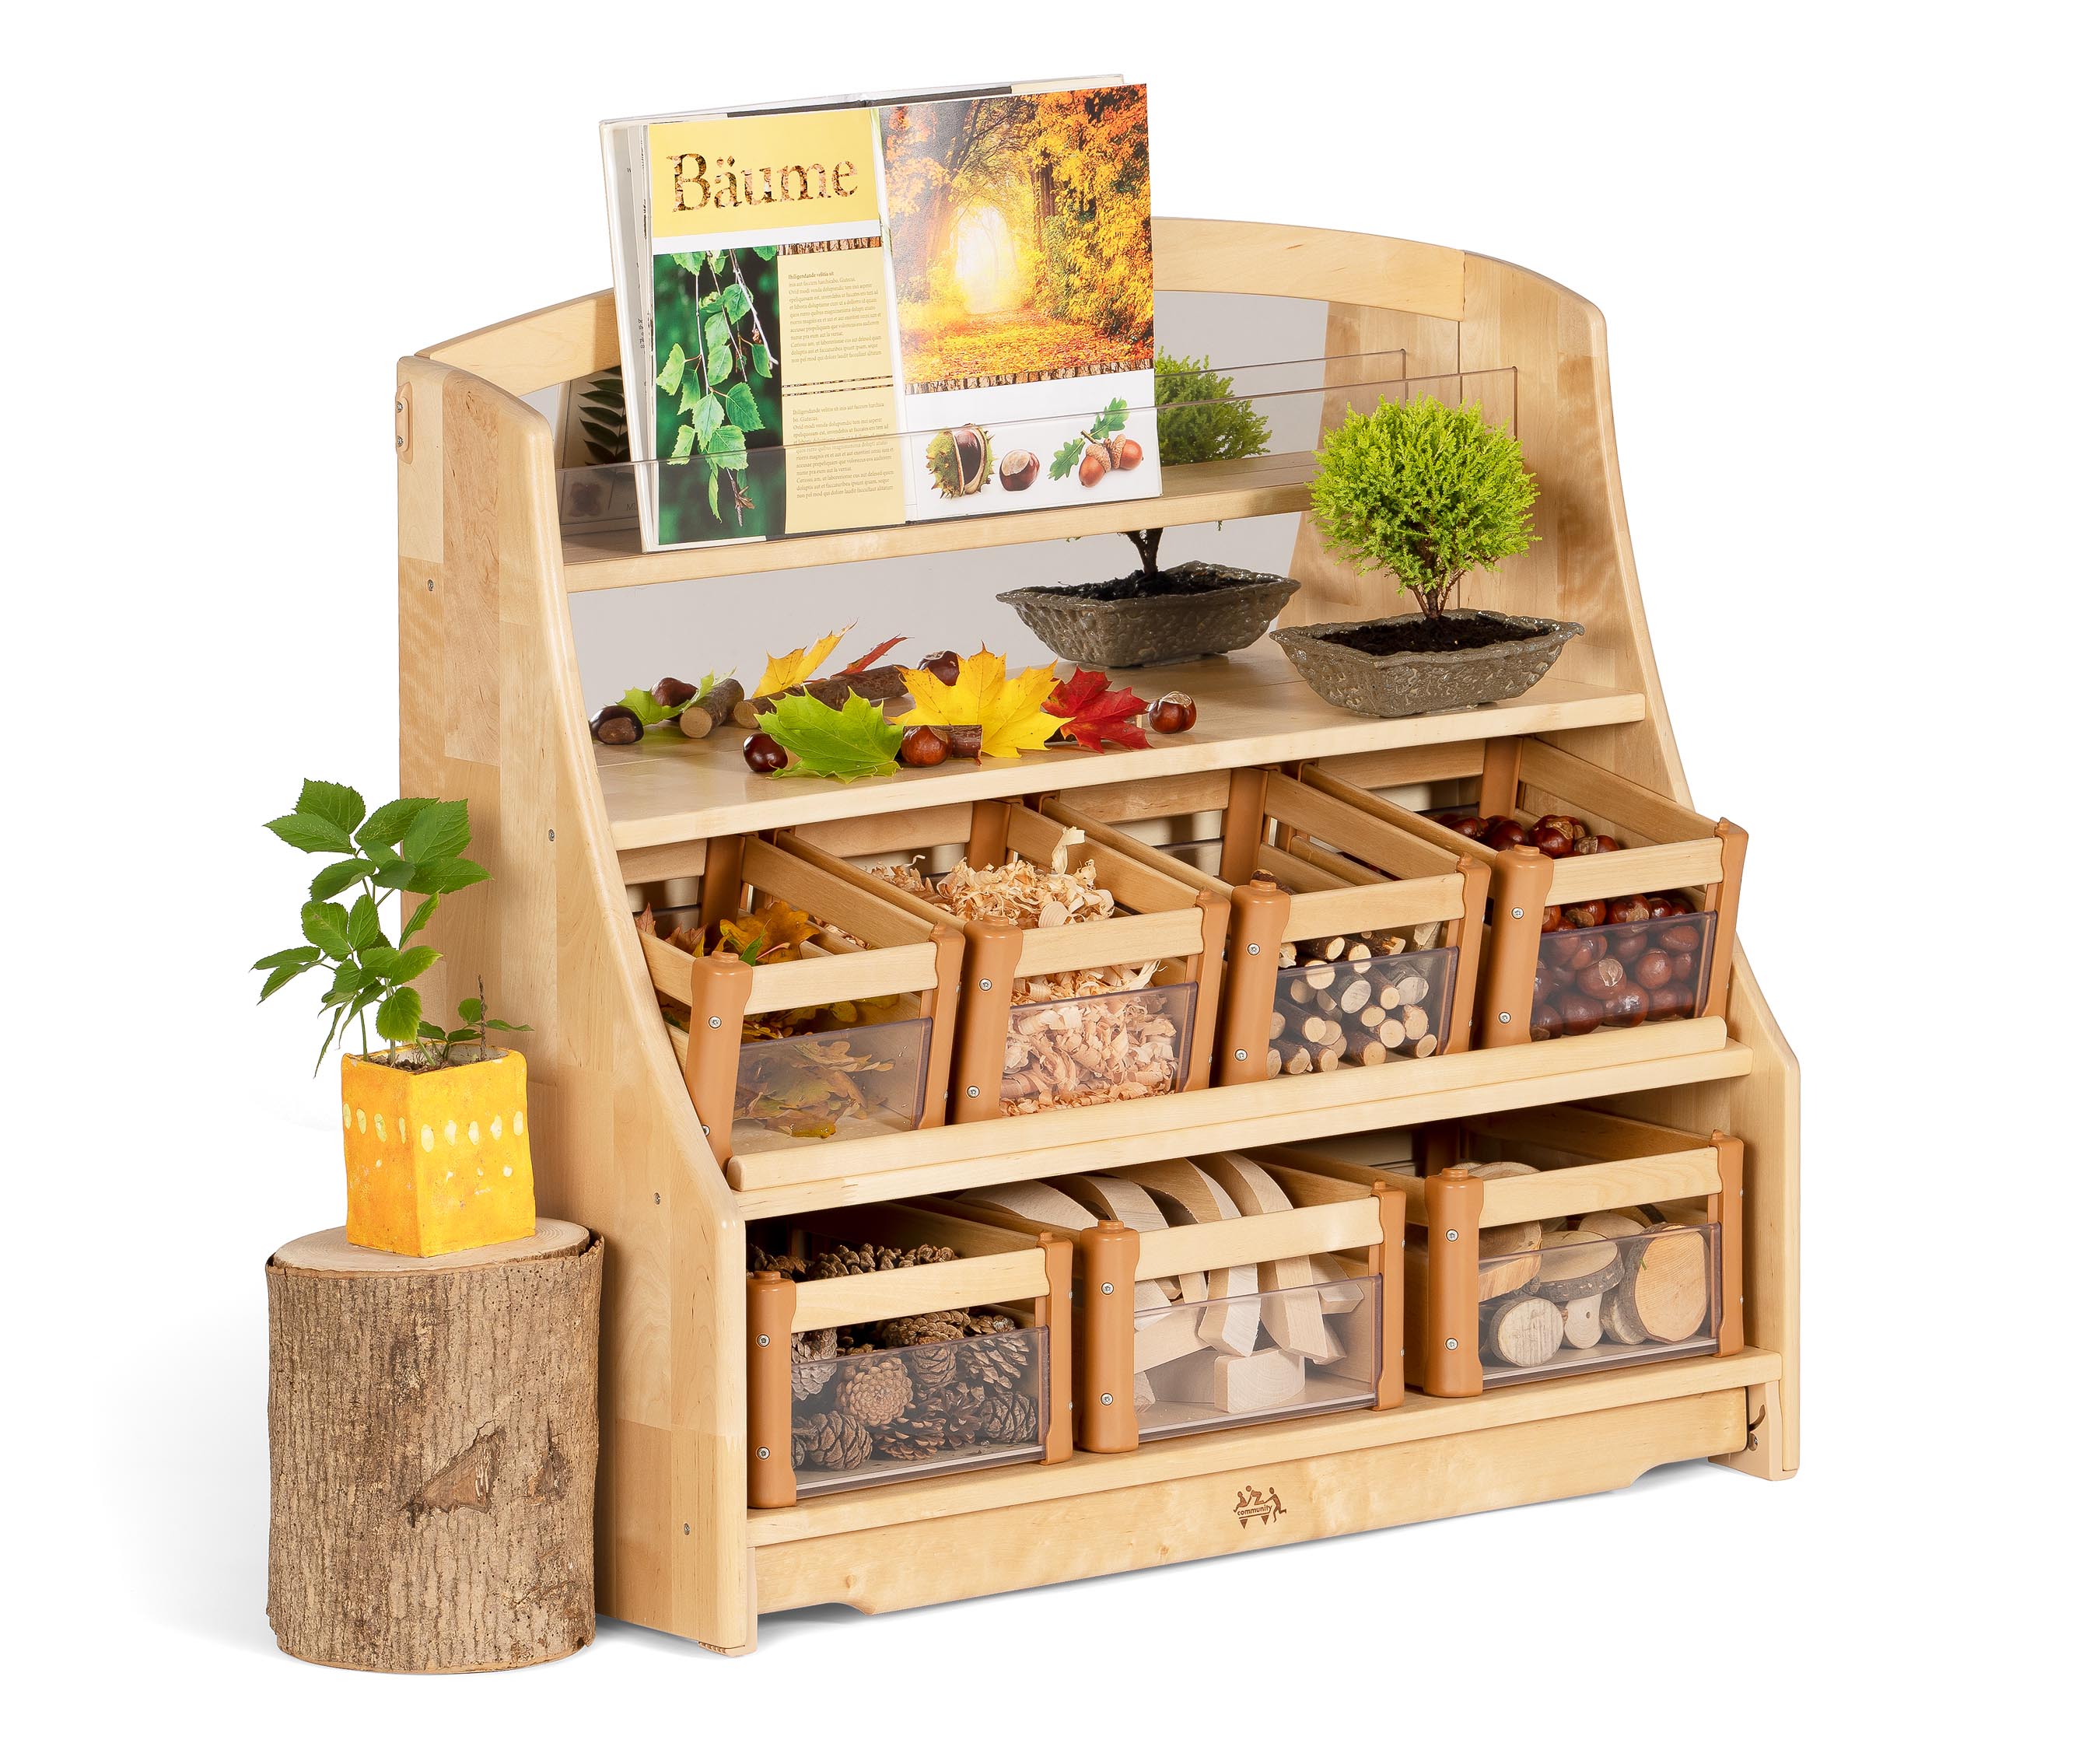 Display shelf with natural materials